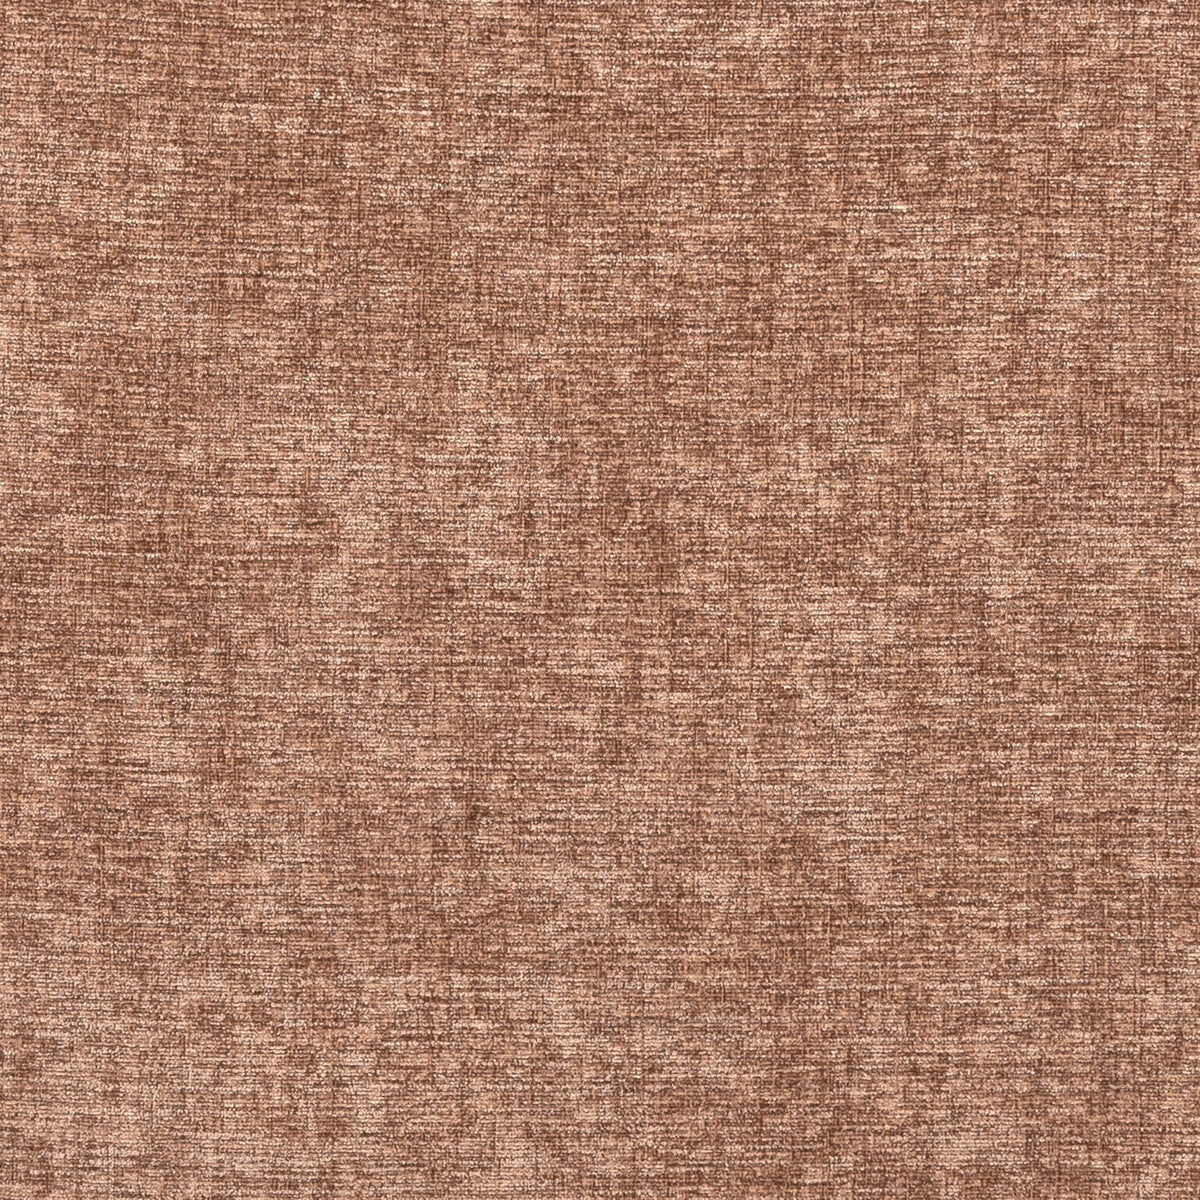 Karina fabric in mocha color - pattern F0371/23.CAC.0 - by Clarke And Clarke in the Clarke &amp; Clarke Karina collection